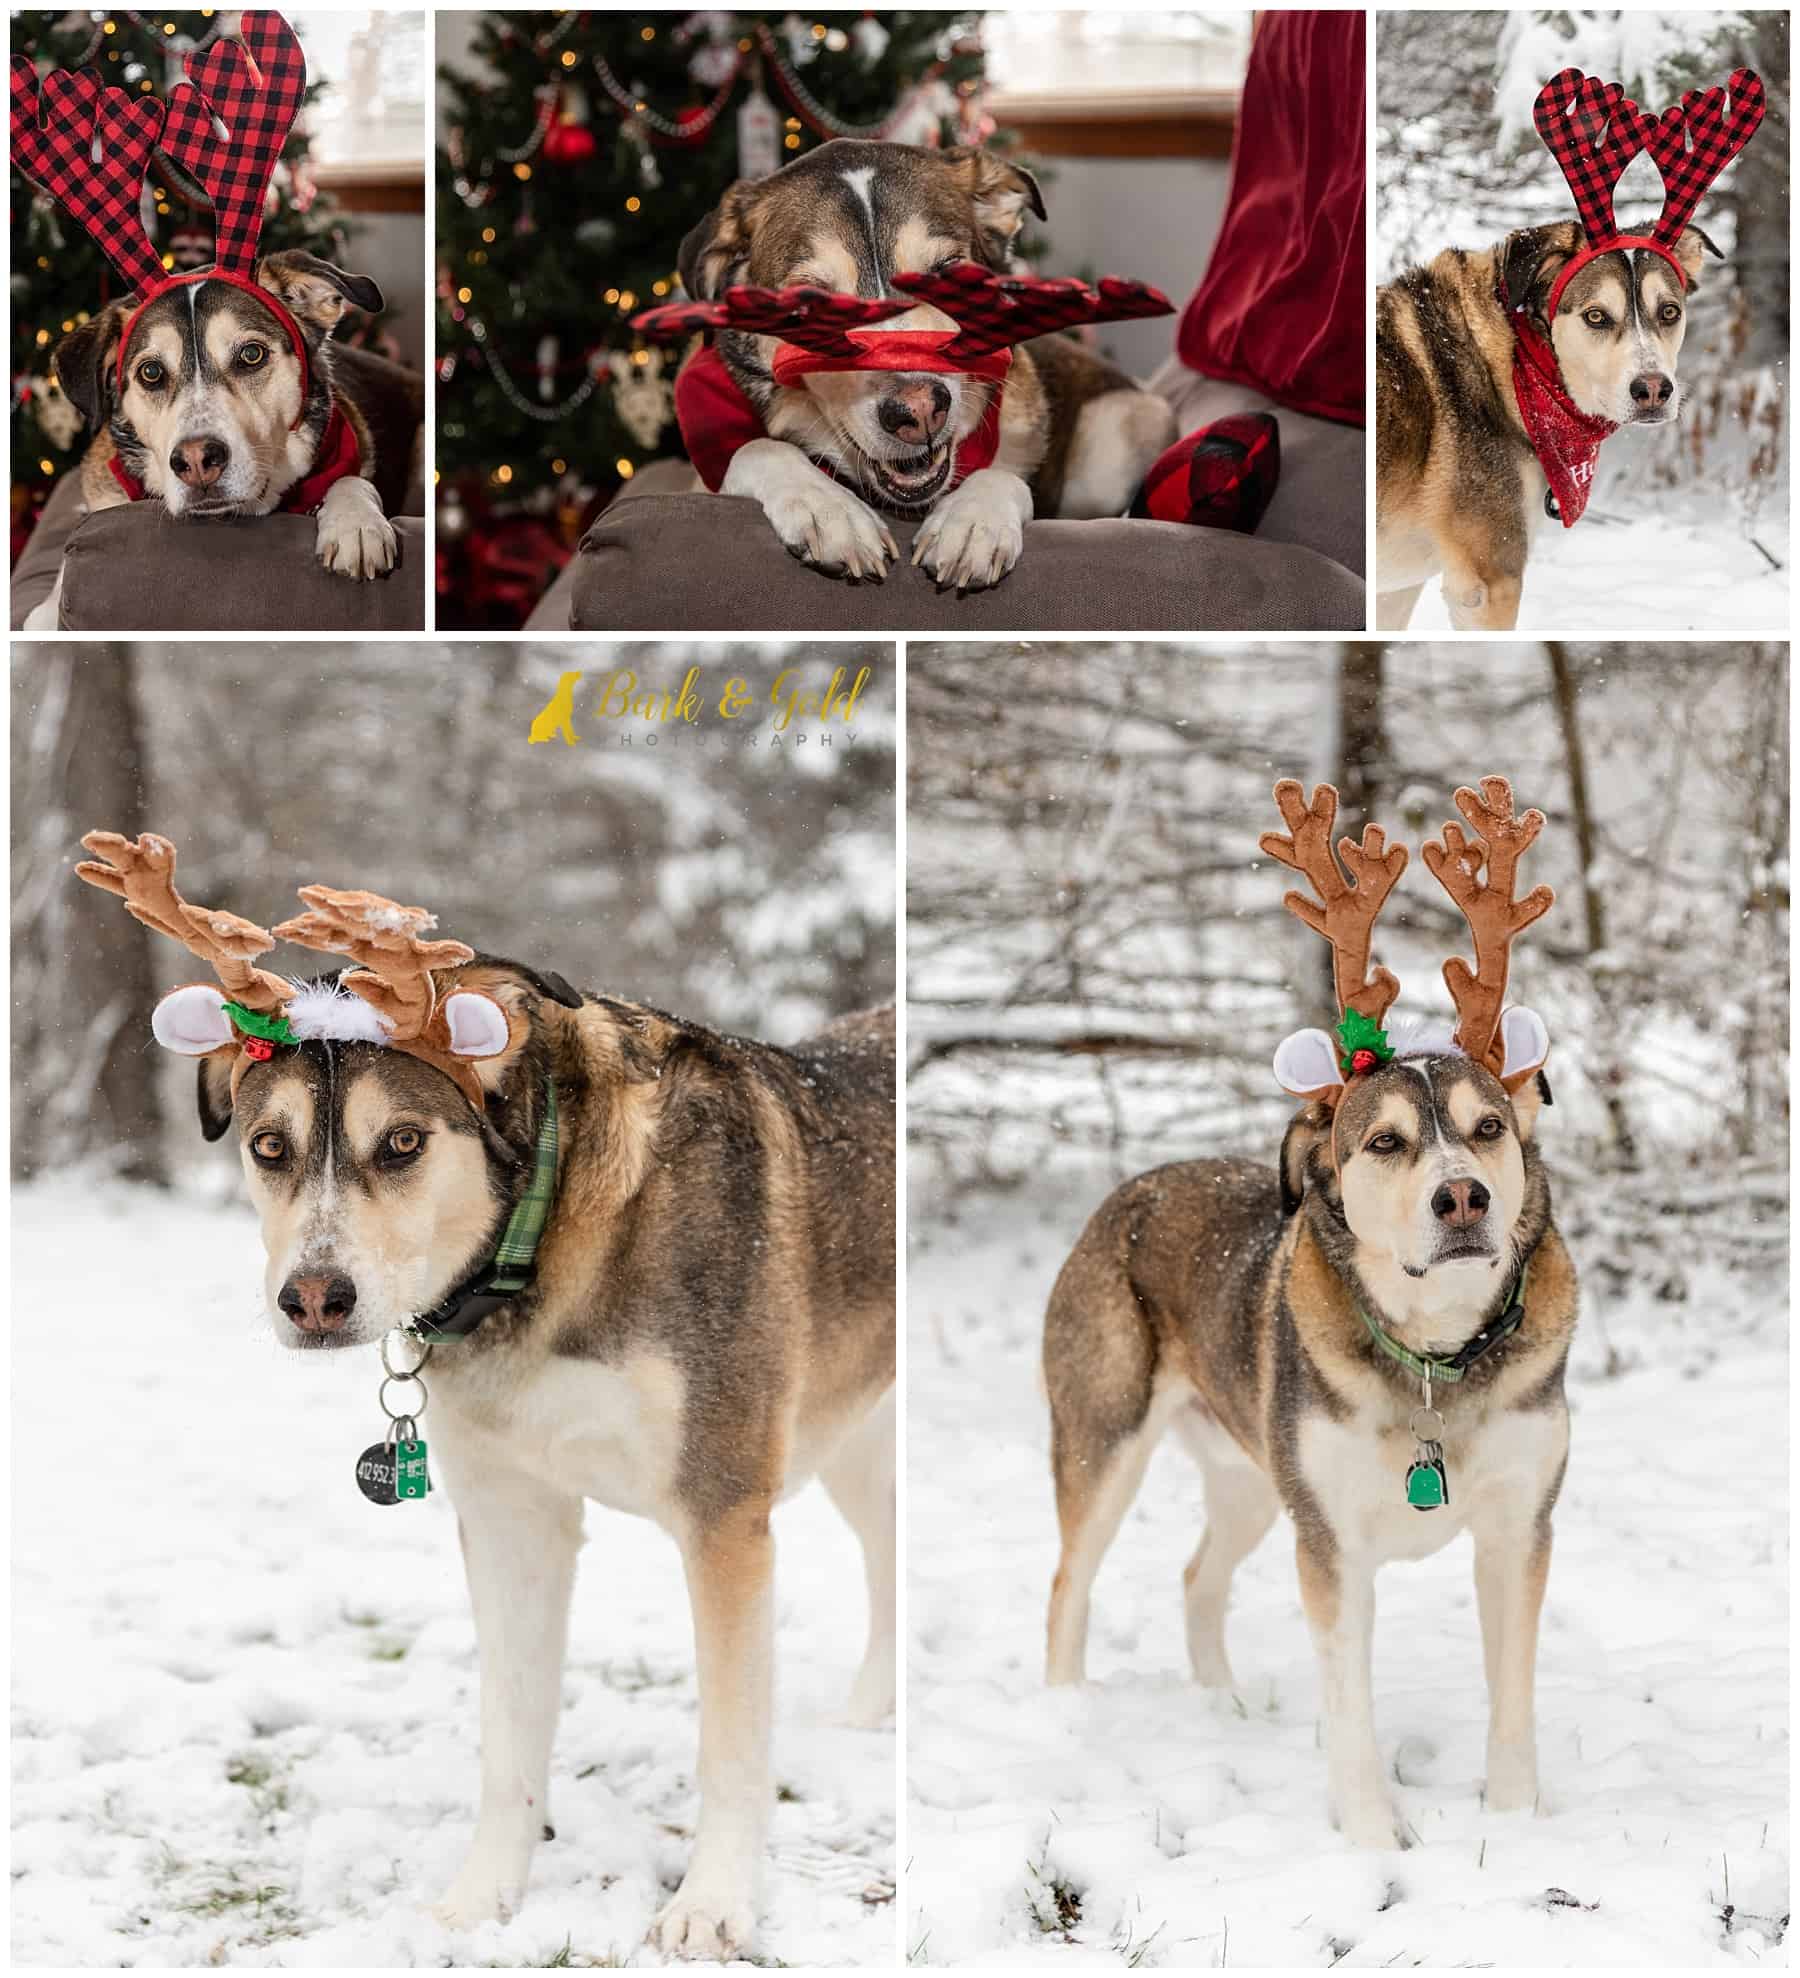 Siberian retriever poses with reindeer antlers for holiday photos in the snow